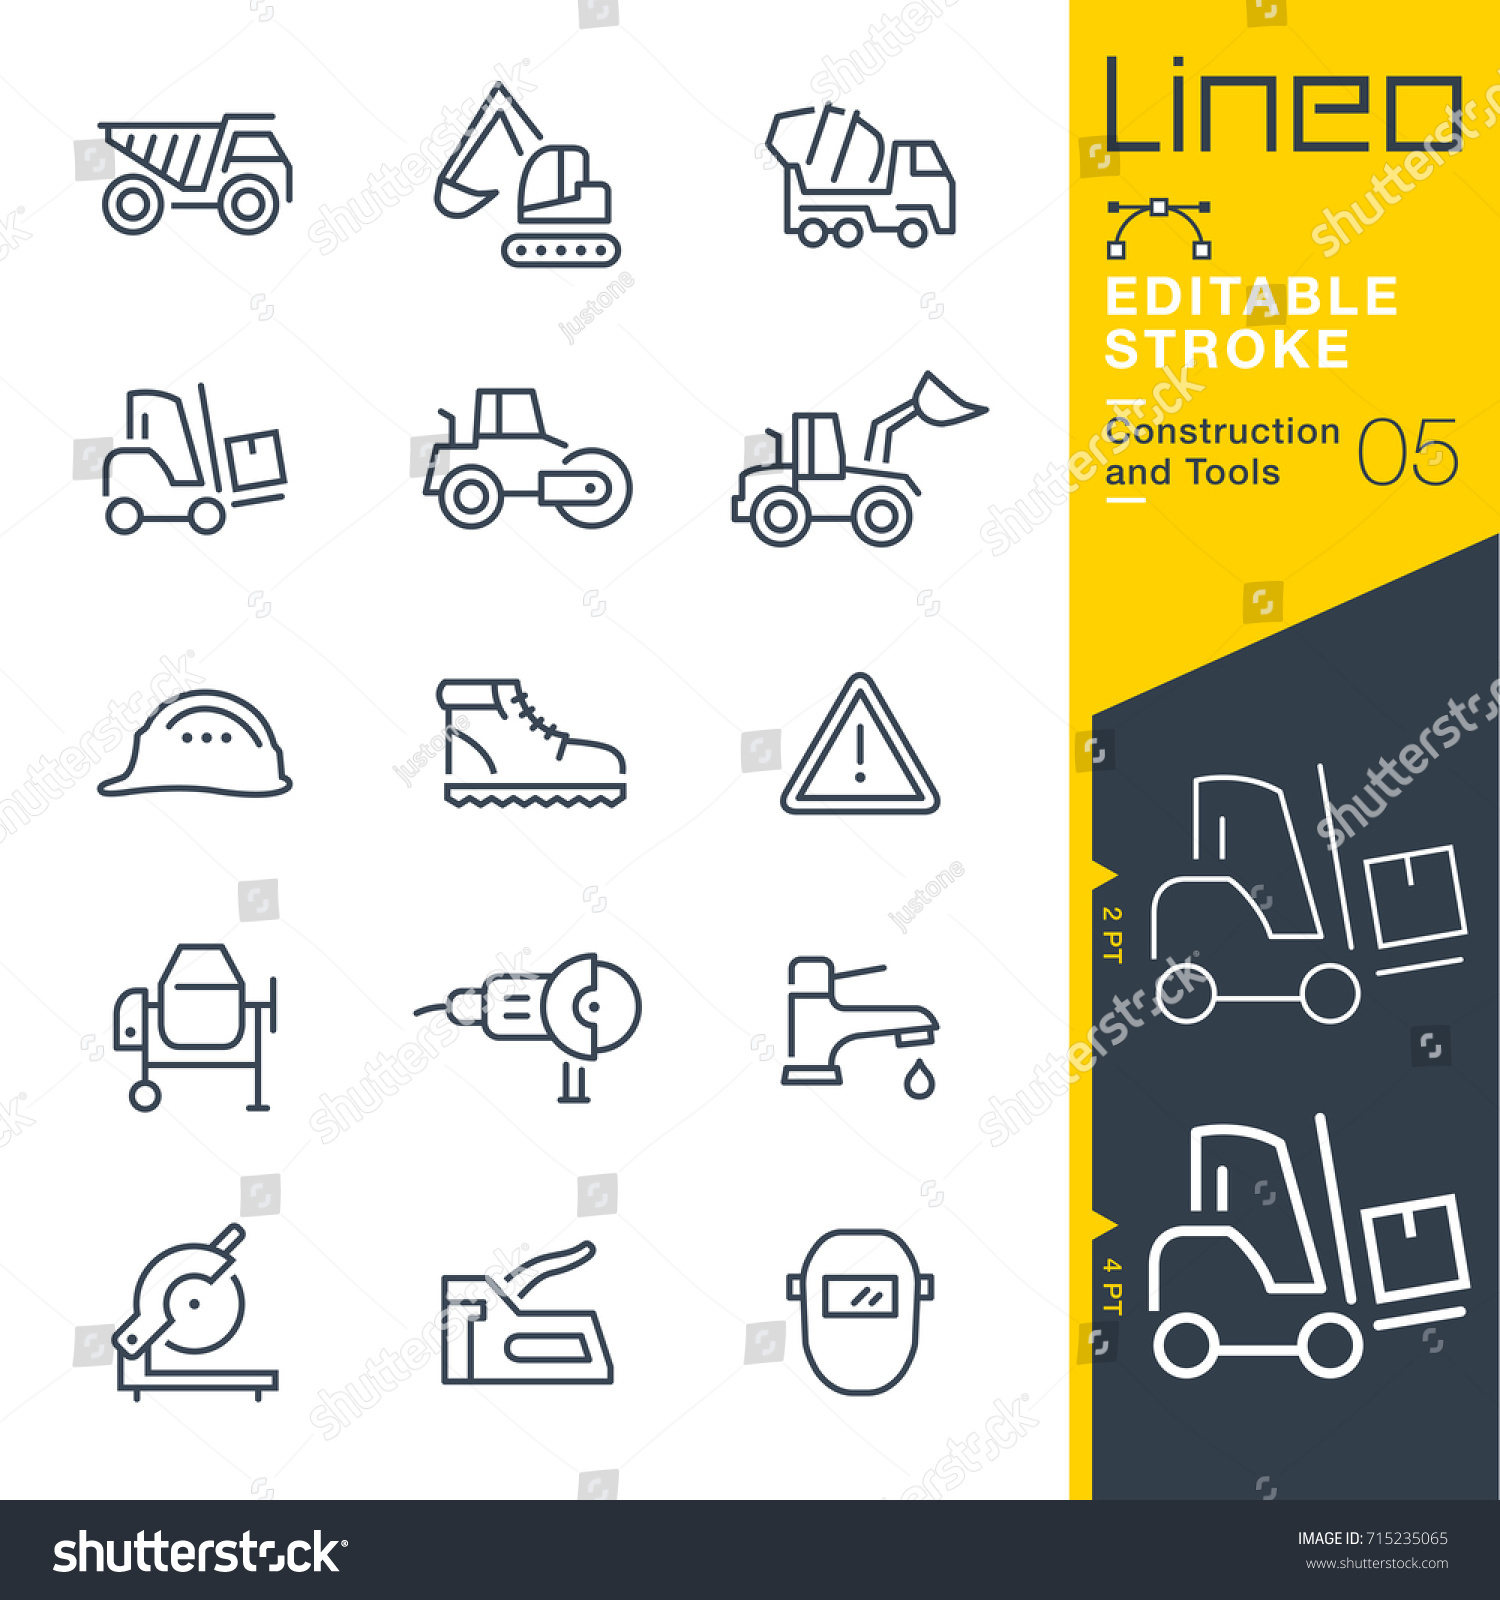 SVG of Lineo Editable Stroke - Construction and Tools line icons
Vector Icons - Adjust stroke weight - Expand to any size - Change to any colour svg